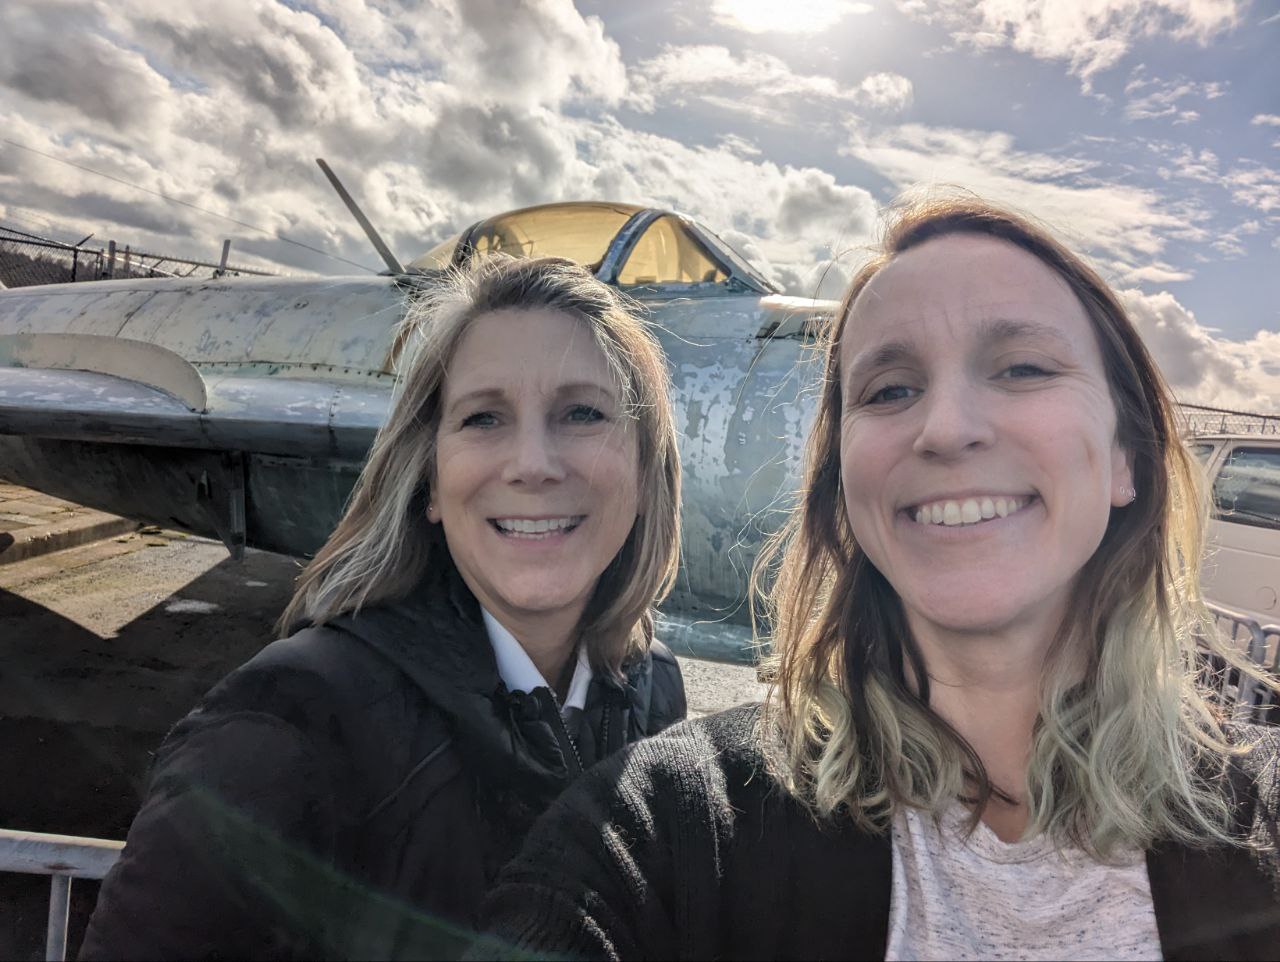 Kay and Denise selfie in front of a aircraft display at the Museum of Flight.